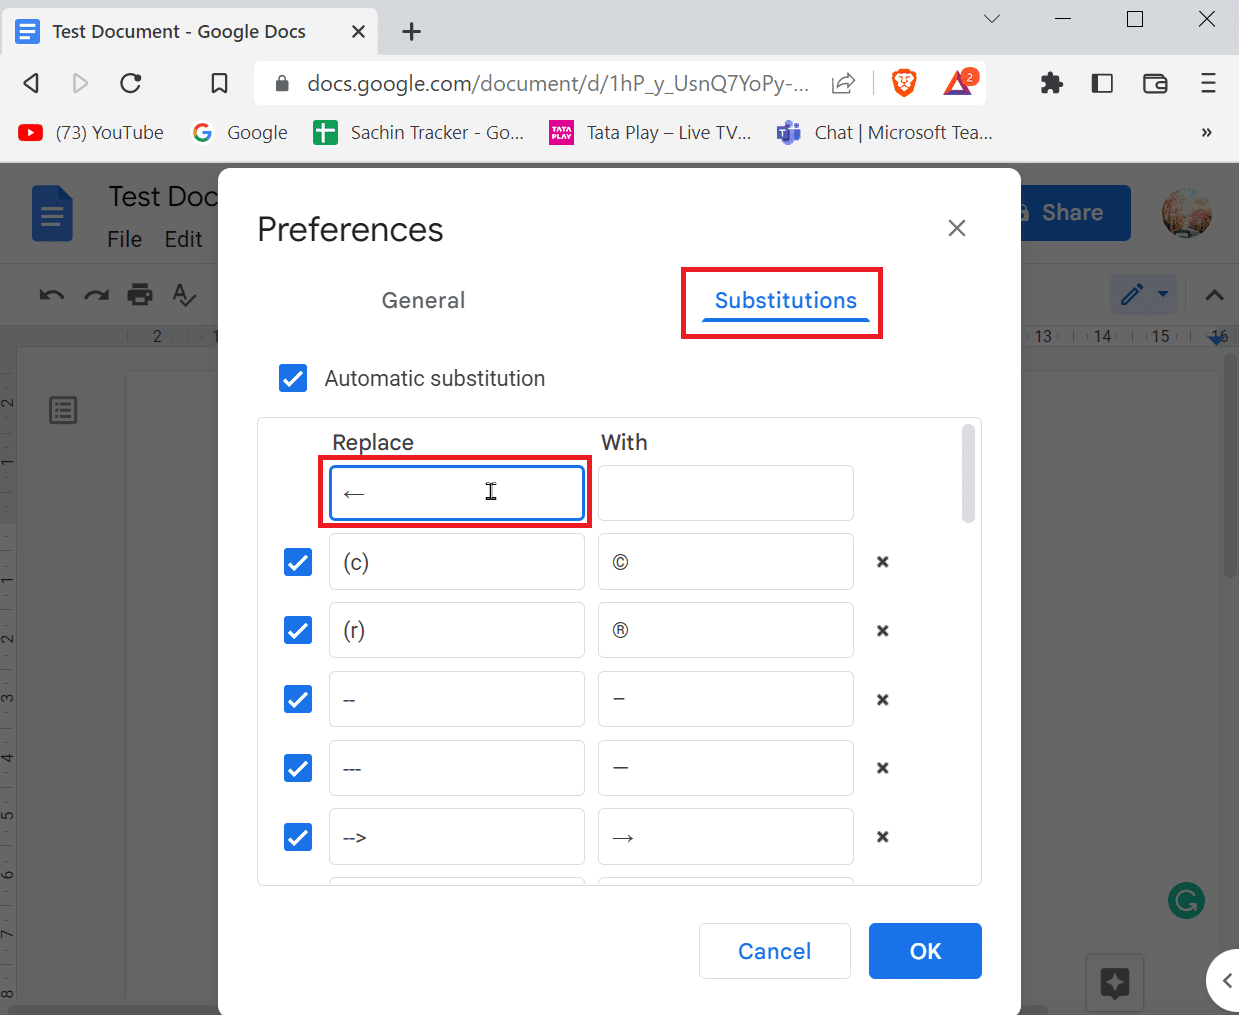 navigate to substitutions tab and enter a symbol on replace tab